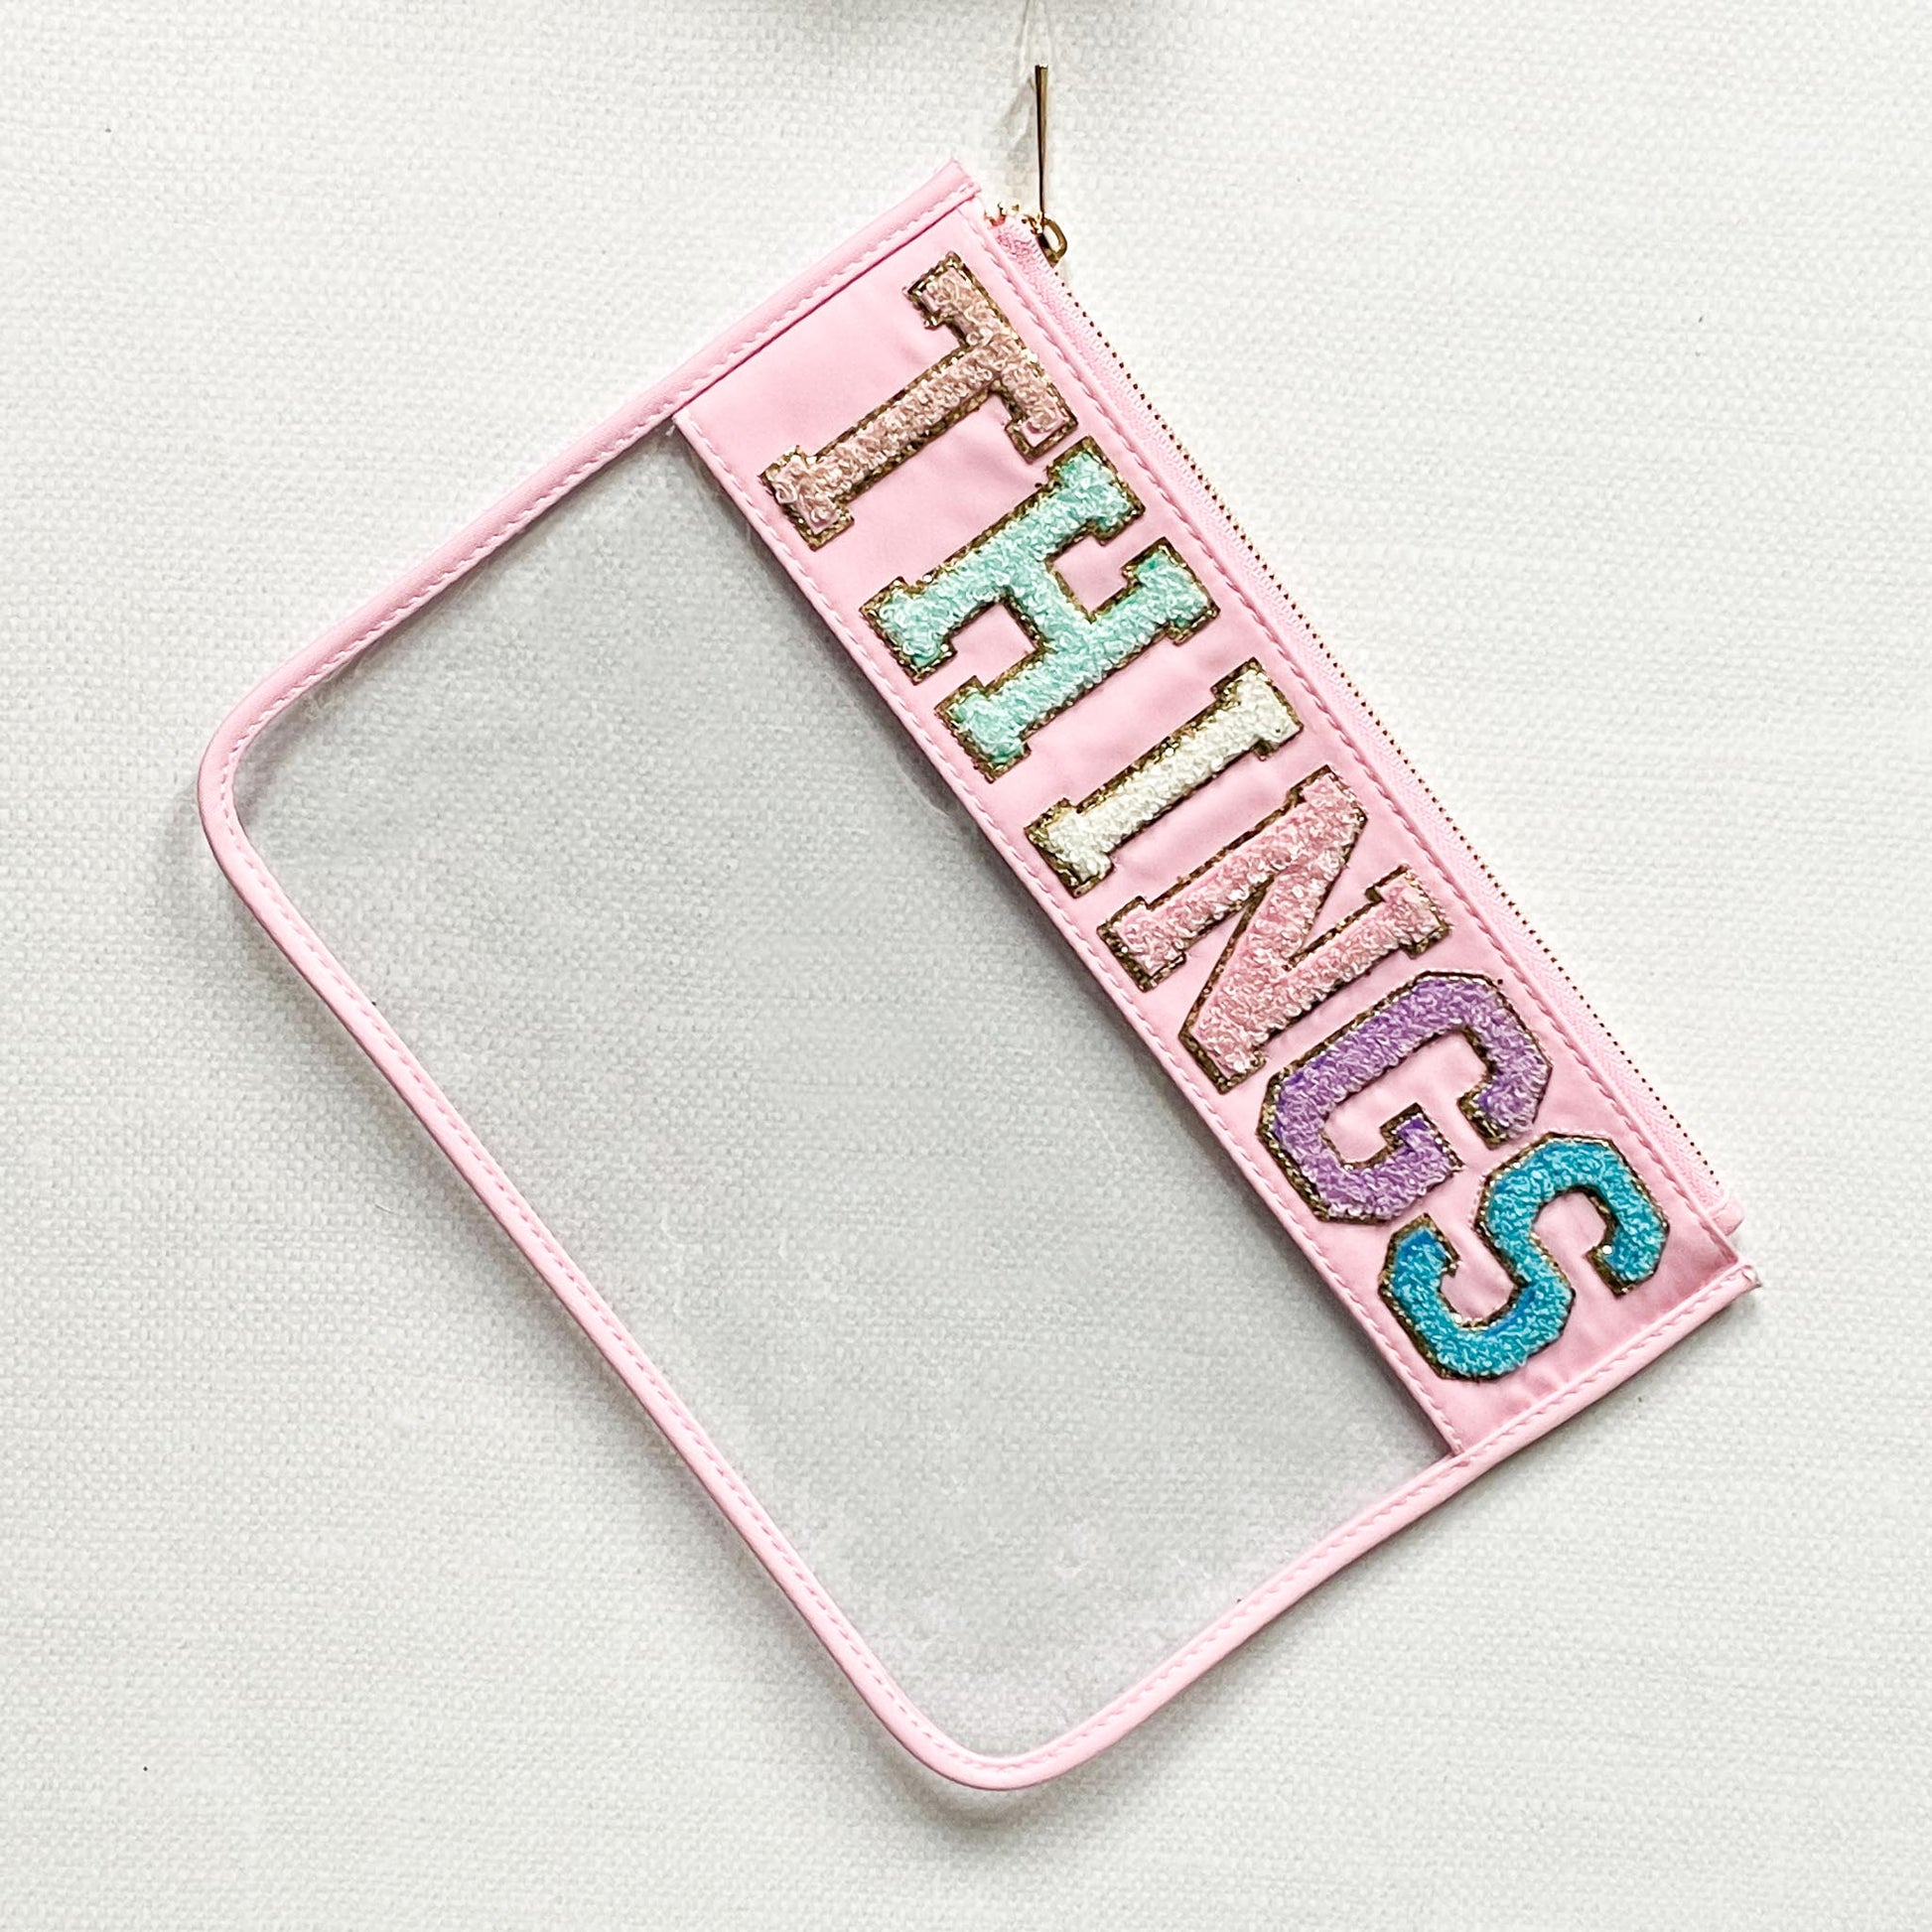 clear nylon bag with pink trim and chenille patches that spell "things".